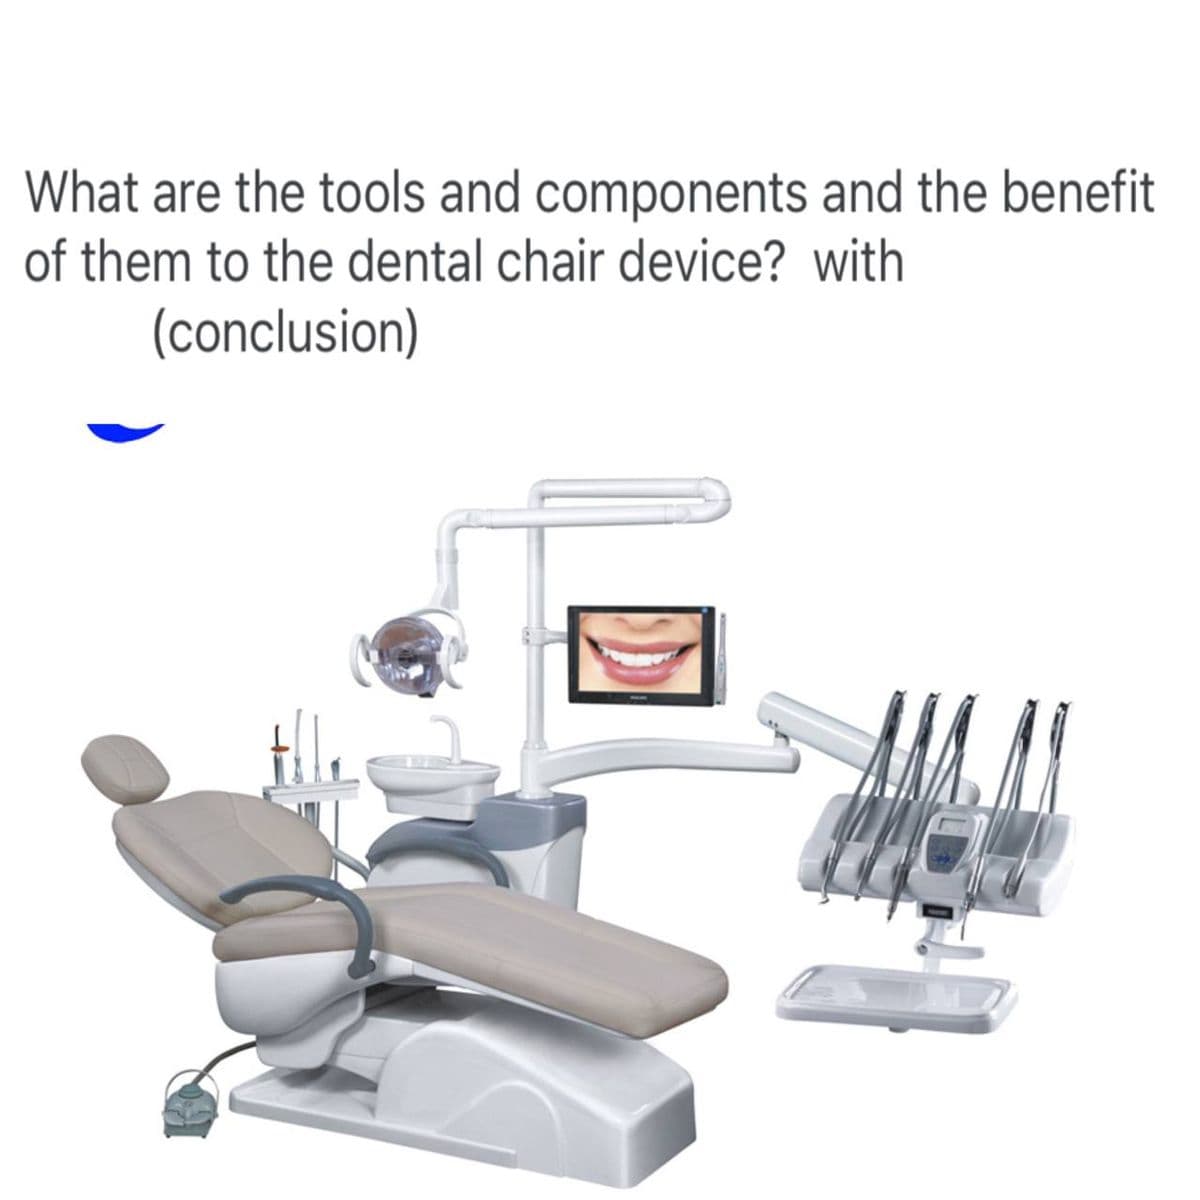 What are the tools and components and the benefit
of them to the dental chair device? with
(conclusion)
ALA